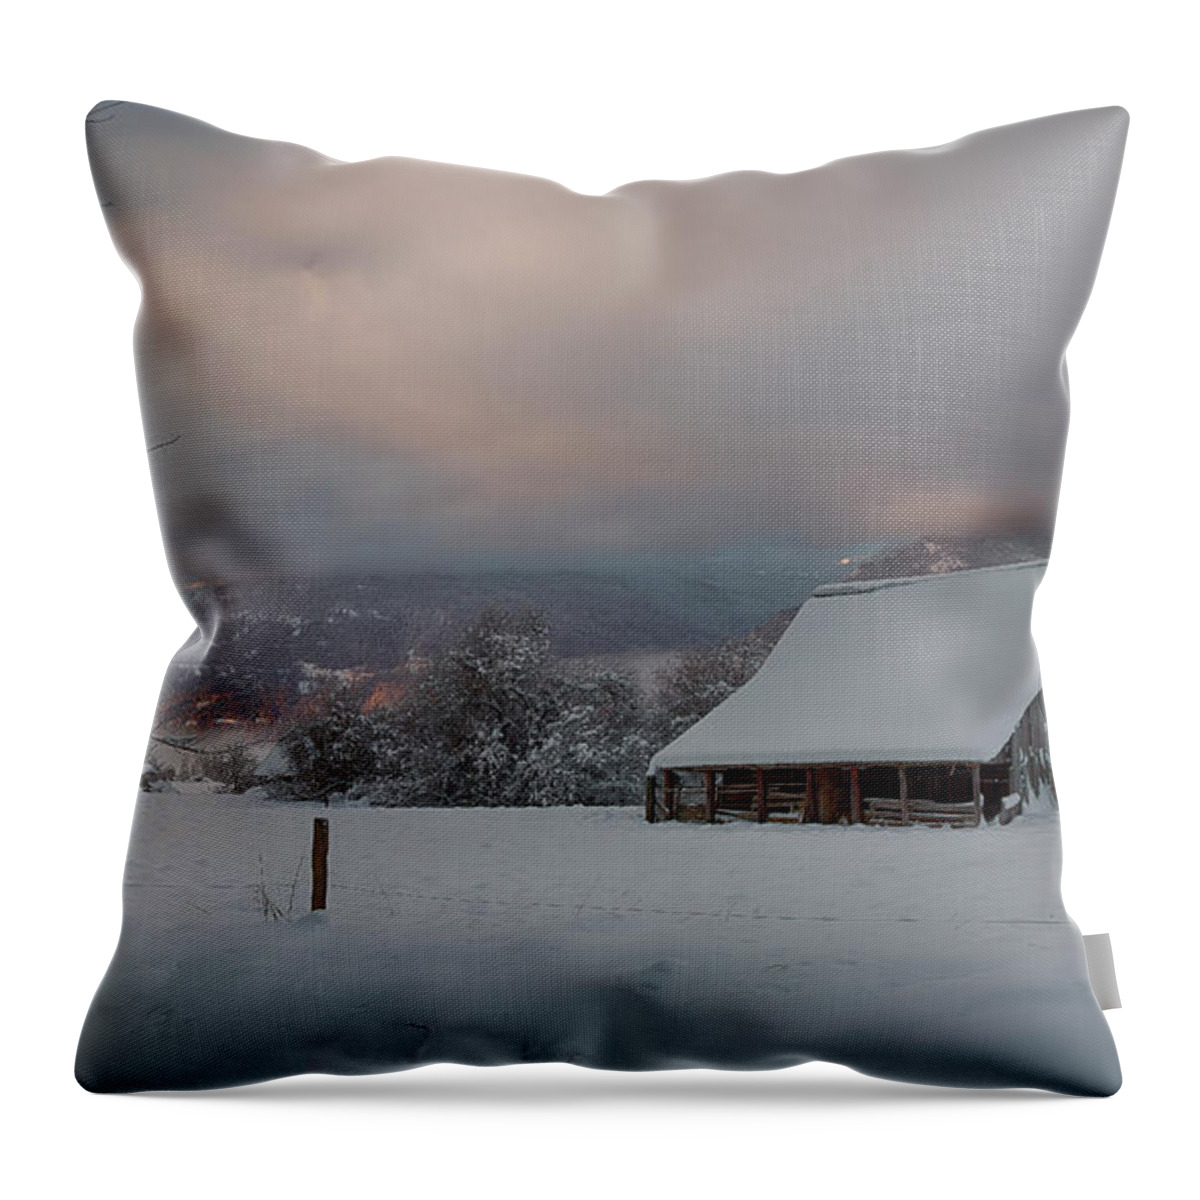 Bonners Ferry Throw Pillow featuring the photograph Kootenai Valley Barn by Idaho Scenic Images Linda Lantzy